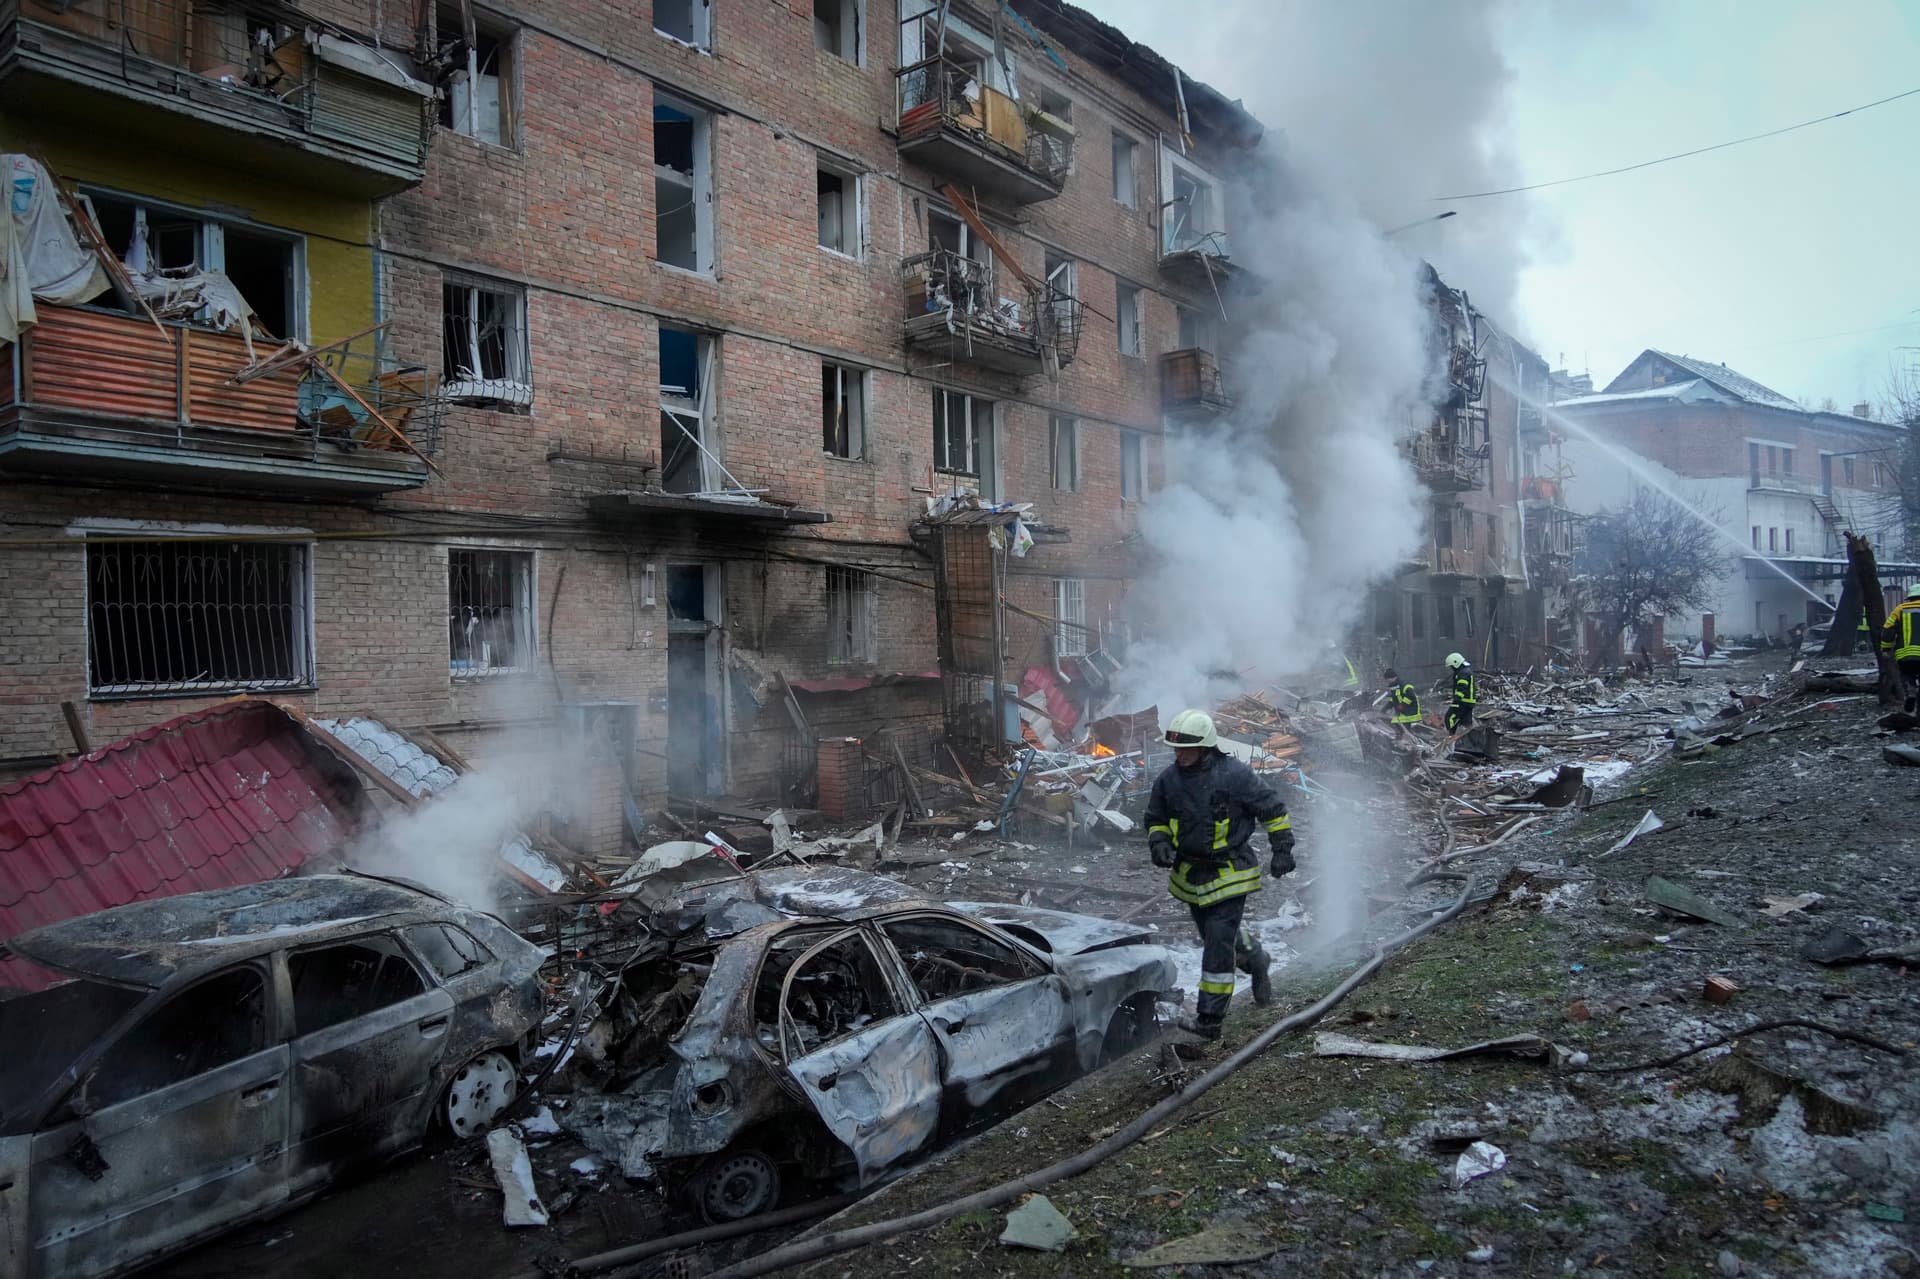 Ukrainian State Emergency Service firefighters work to extinguish a fire at the scene of a Russian shelling in the town of Vyshgorod